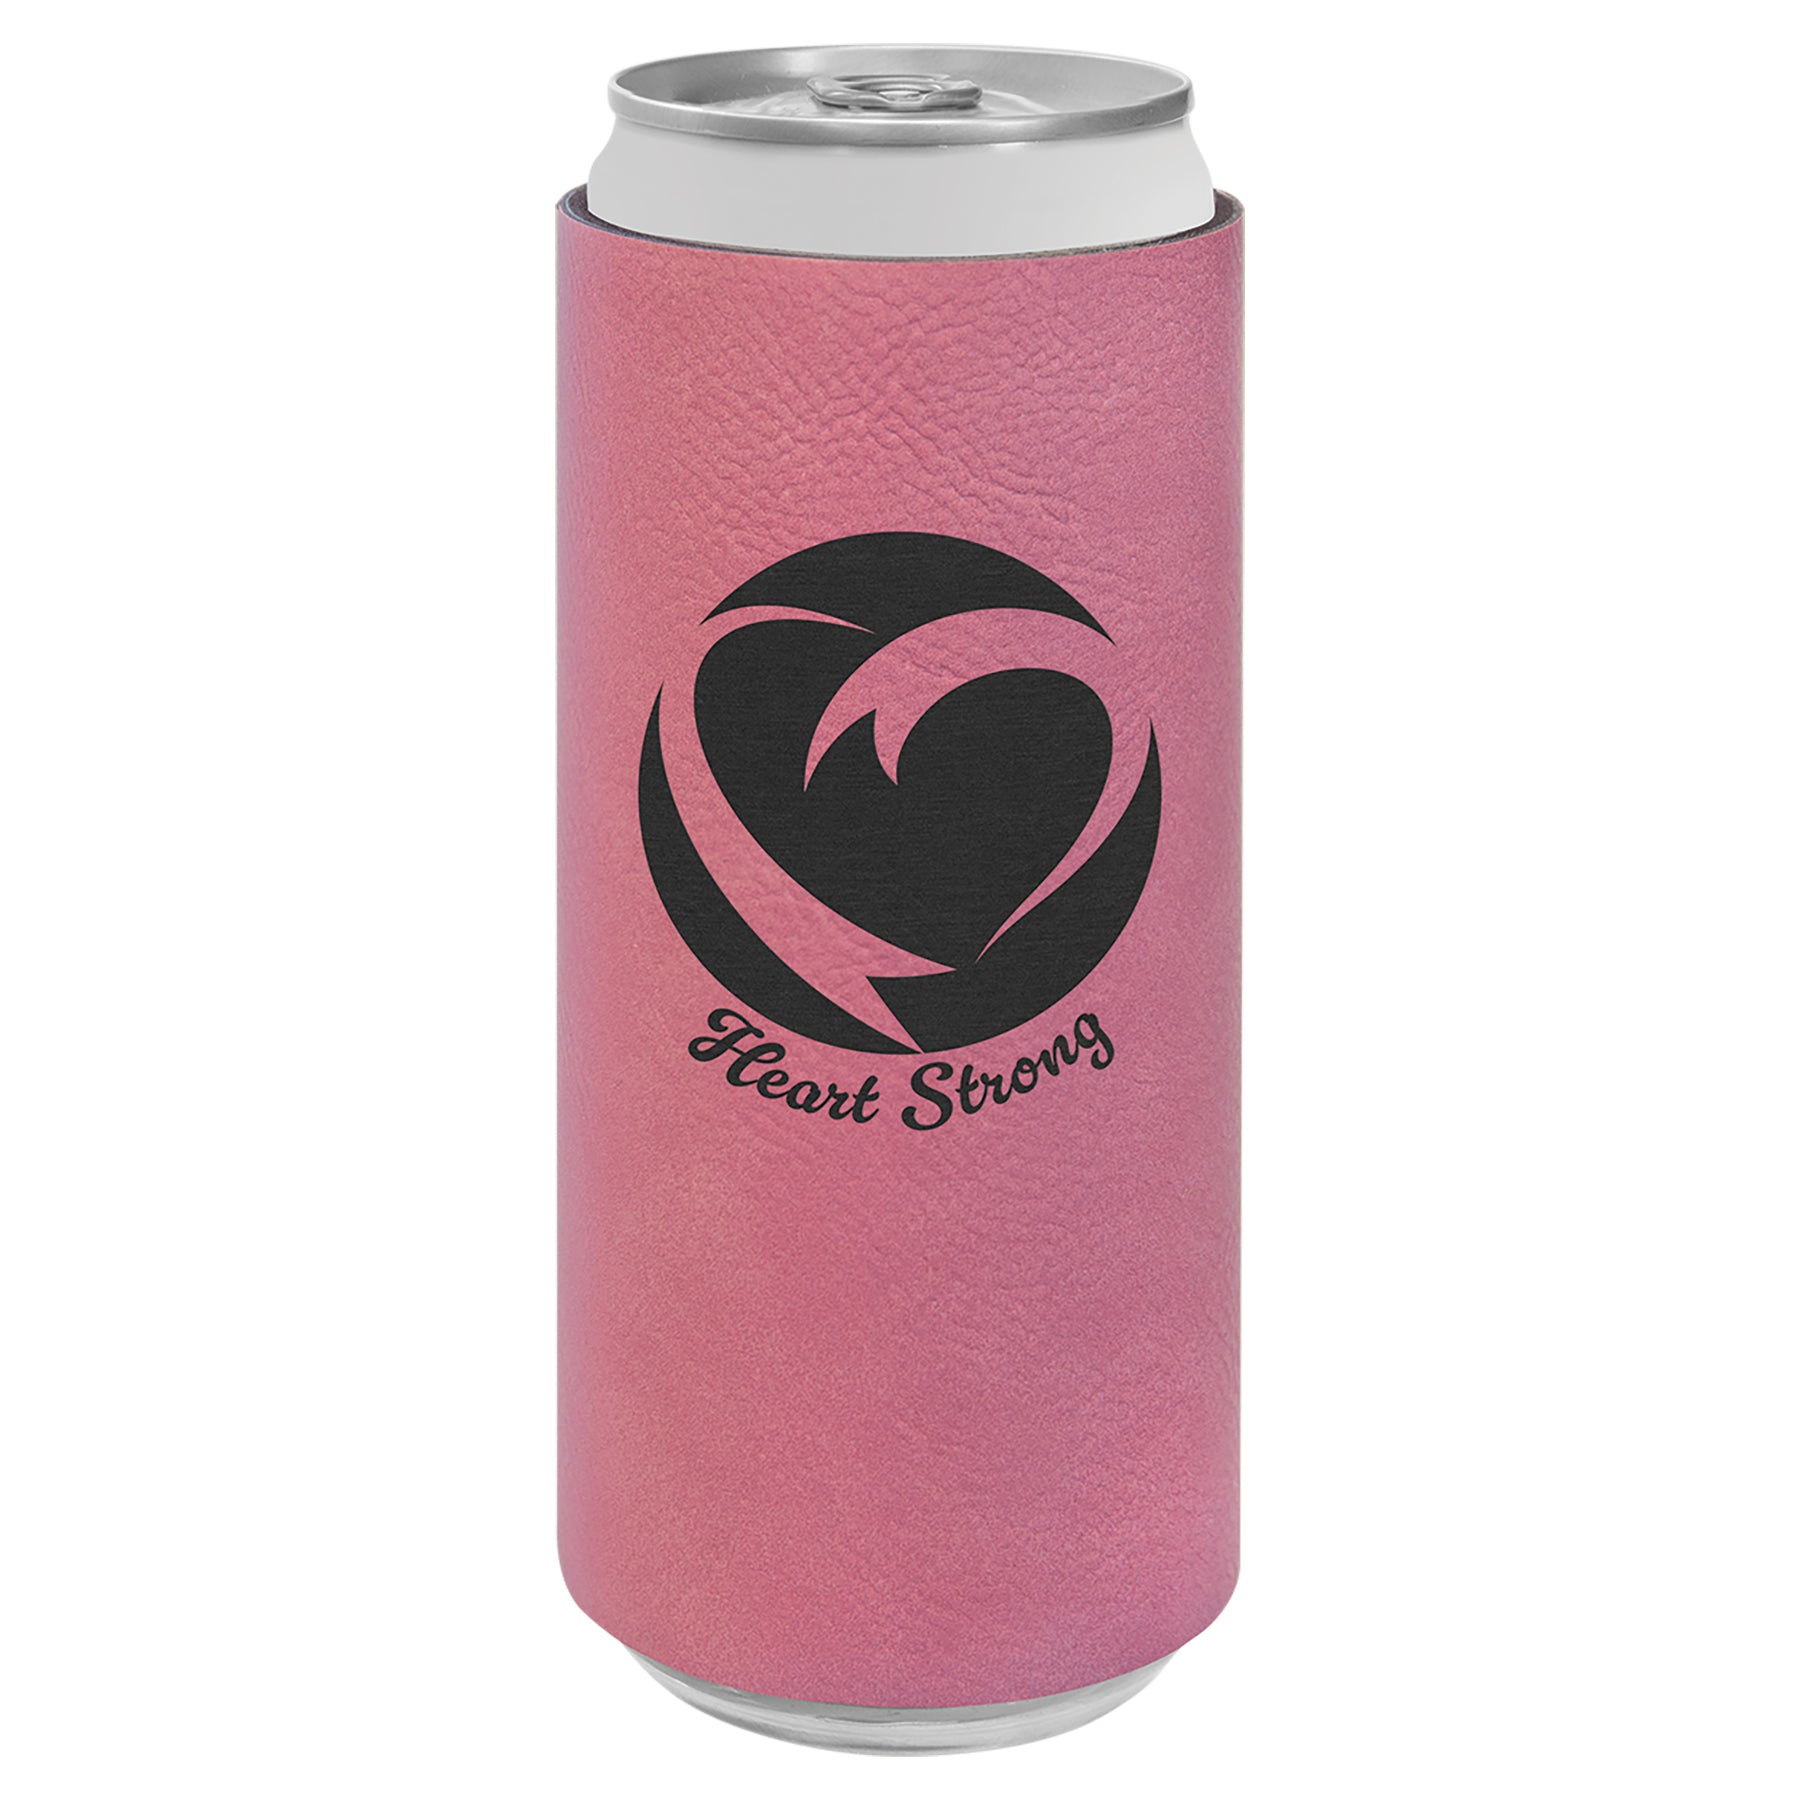 Personalized White Claw Skinny Can Koozies $12.99 Shipped (Retail